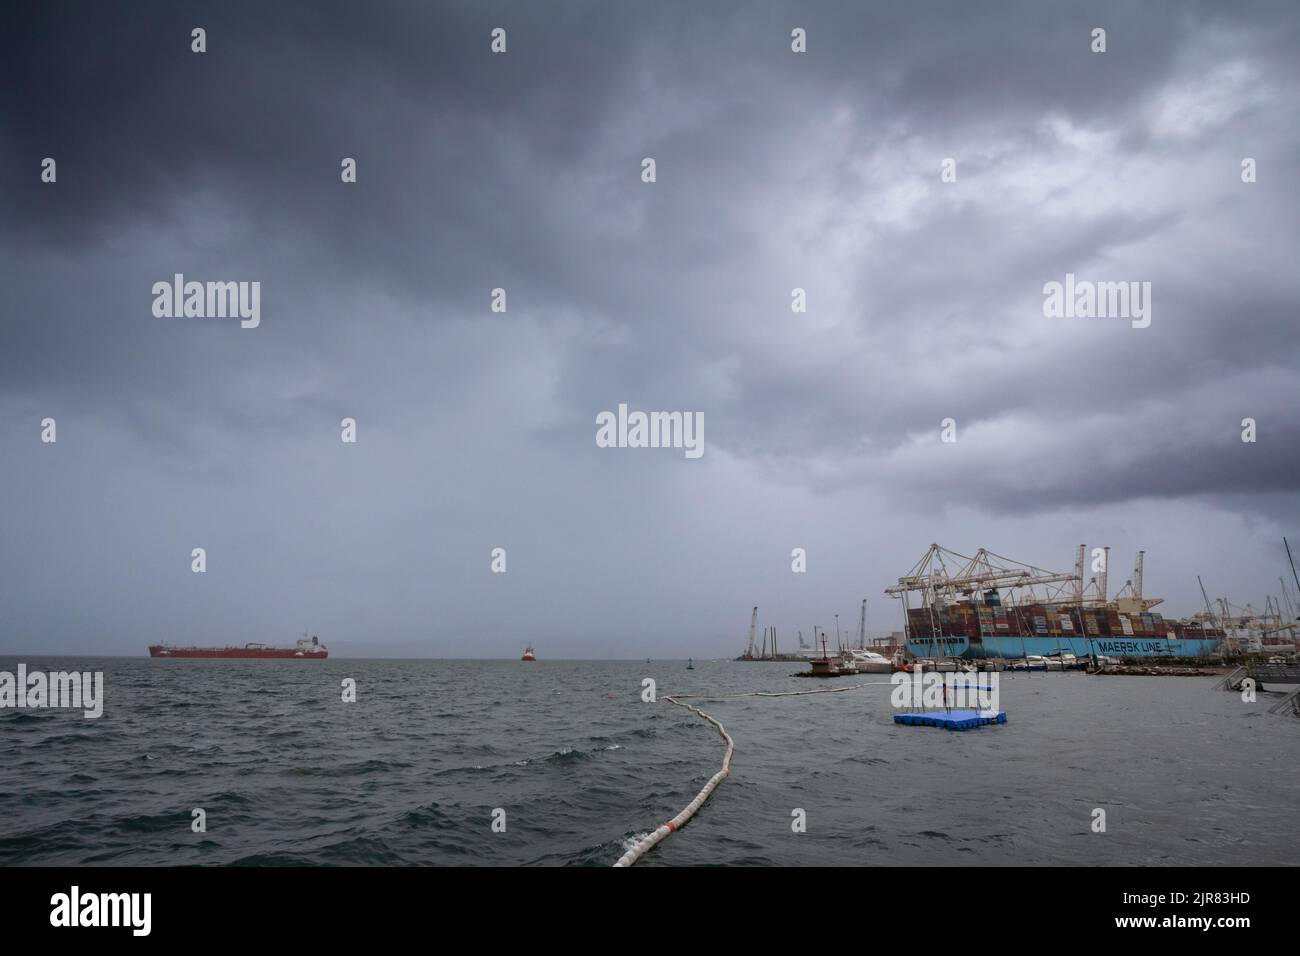 Picture of the panorama of Luka koper, the port of koper, with industrial cranes, a container ship and a kid swimming . Port of Koper is a public limi Stock Photo